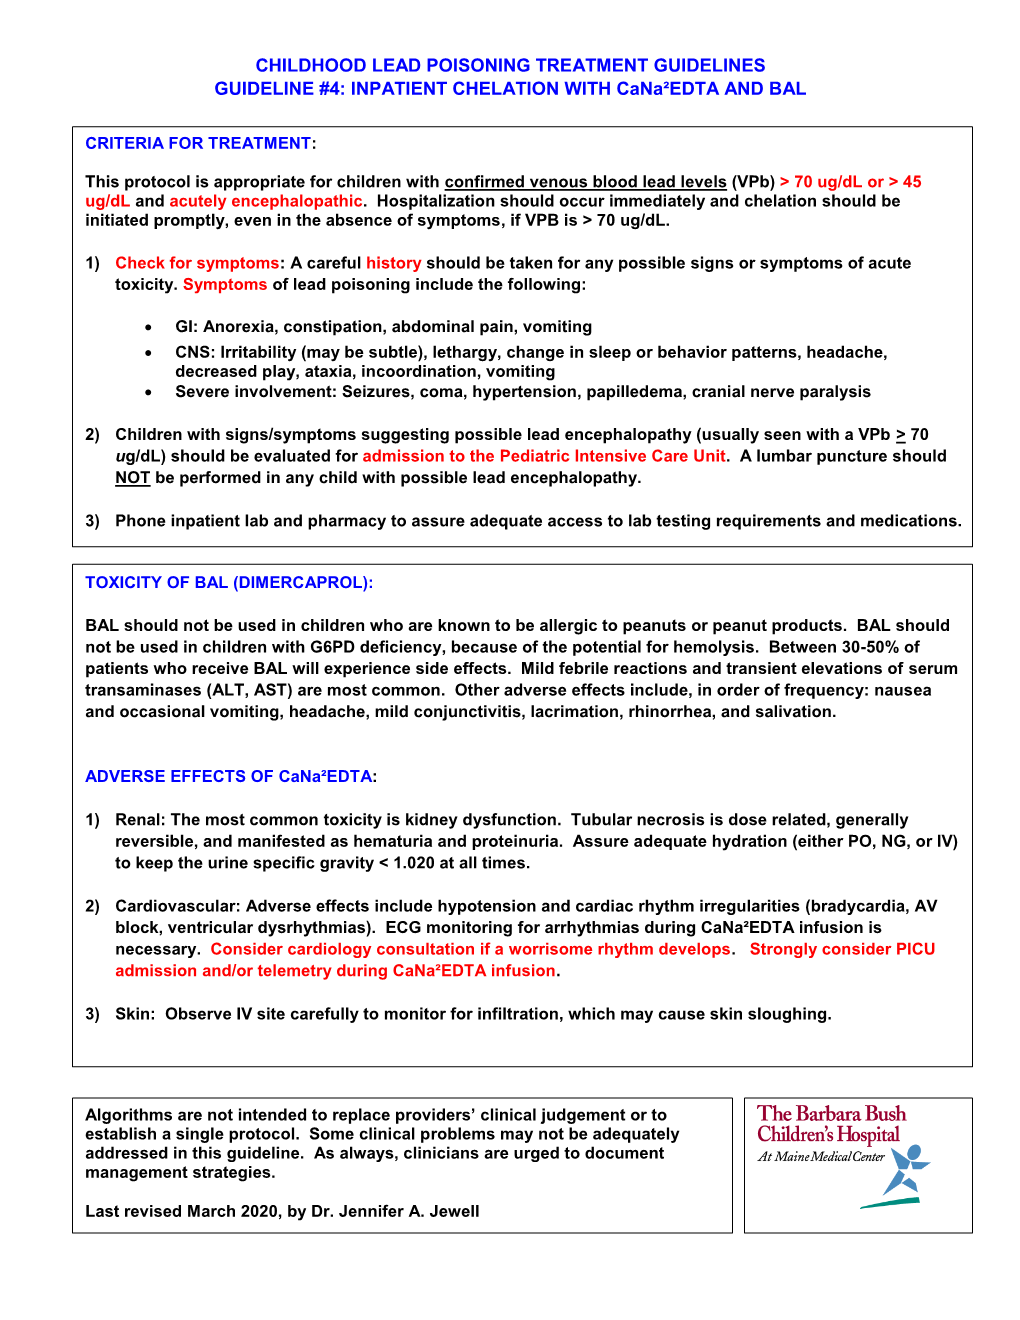 CHILDHOOD LEAD POISONING TREATMENT GUIDELINES GUIDELINE #4: INPATIENT CHELATION with Cana²edta and BAL